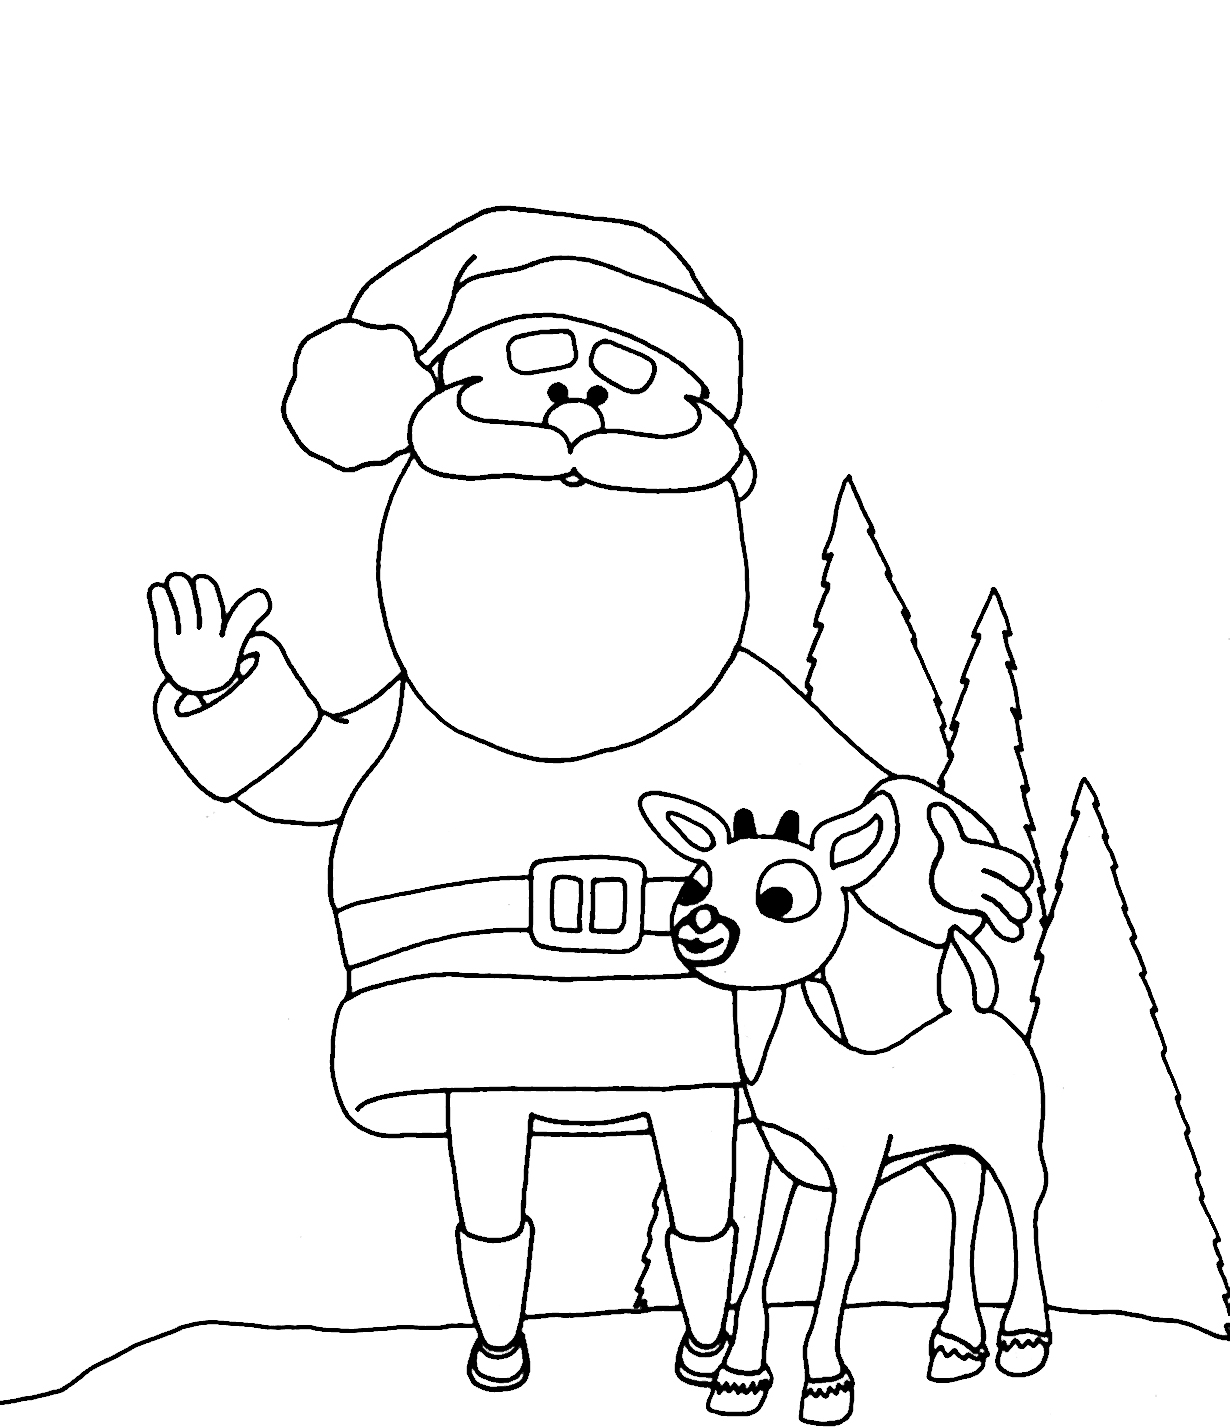 Santa and Reindeer for Kids Coloring Page